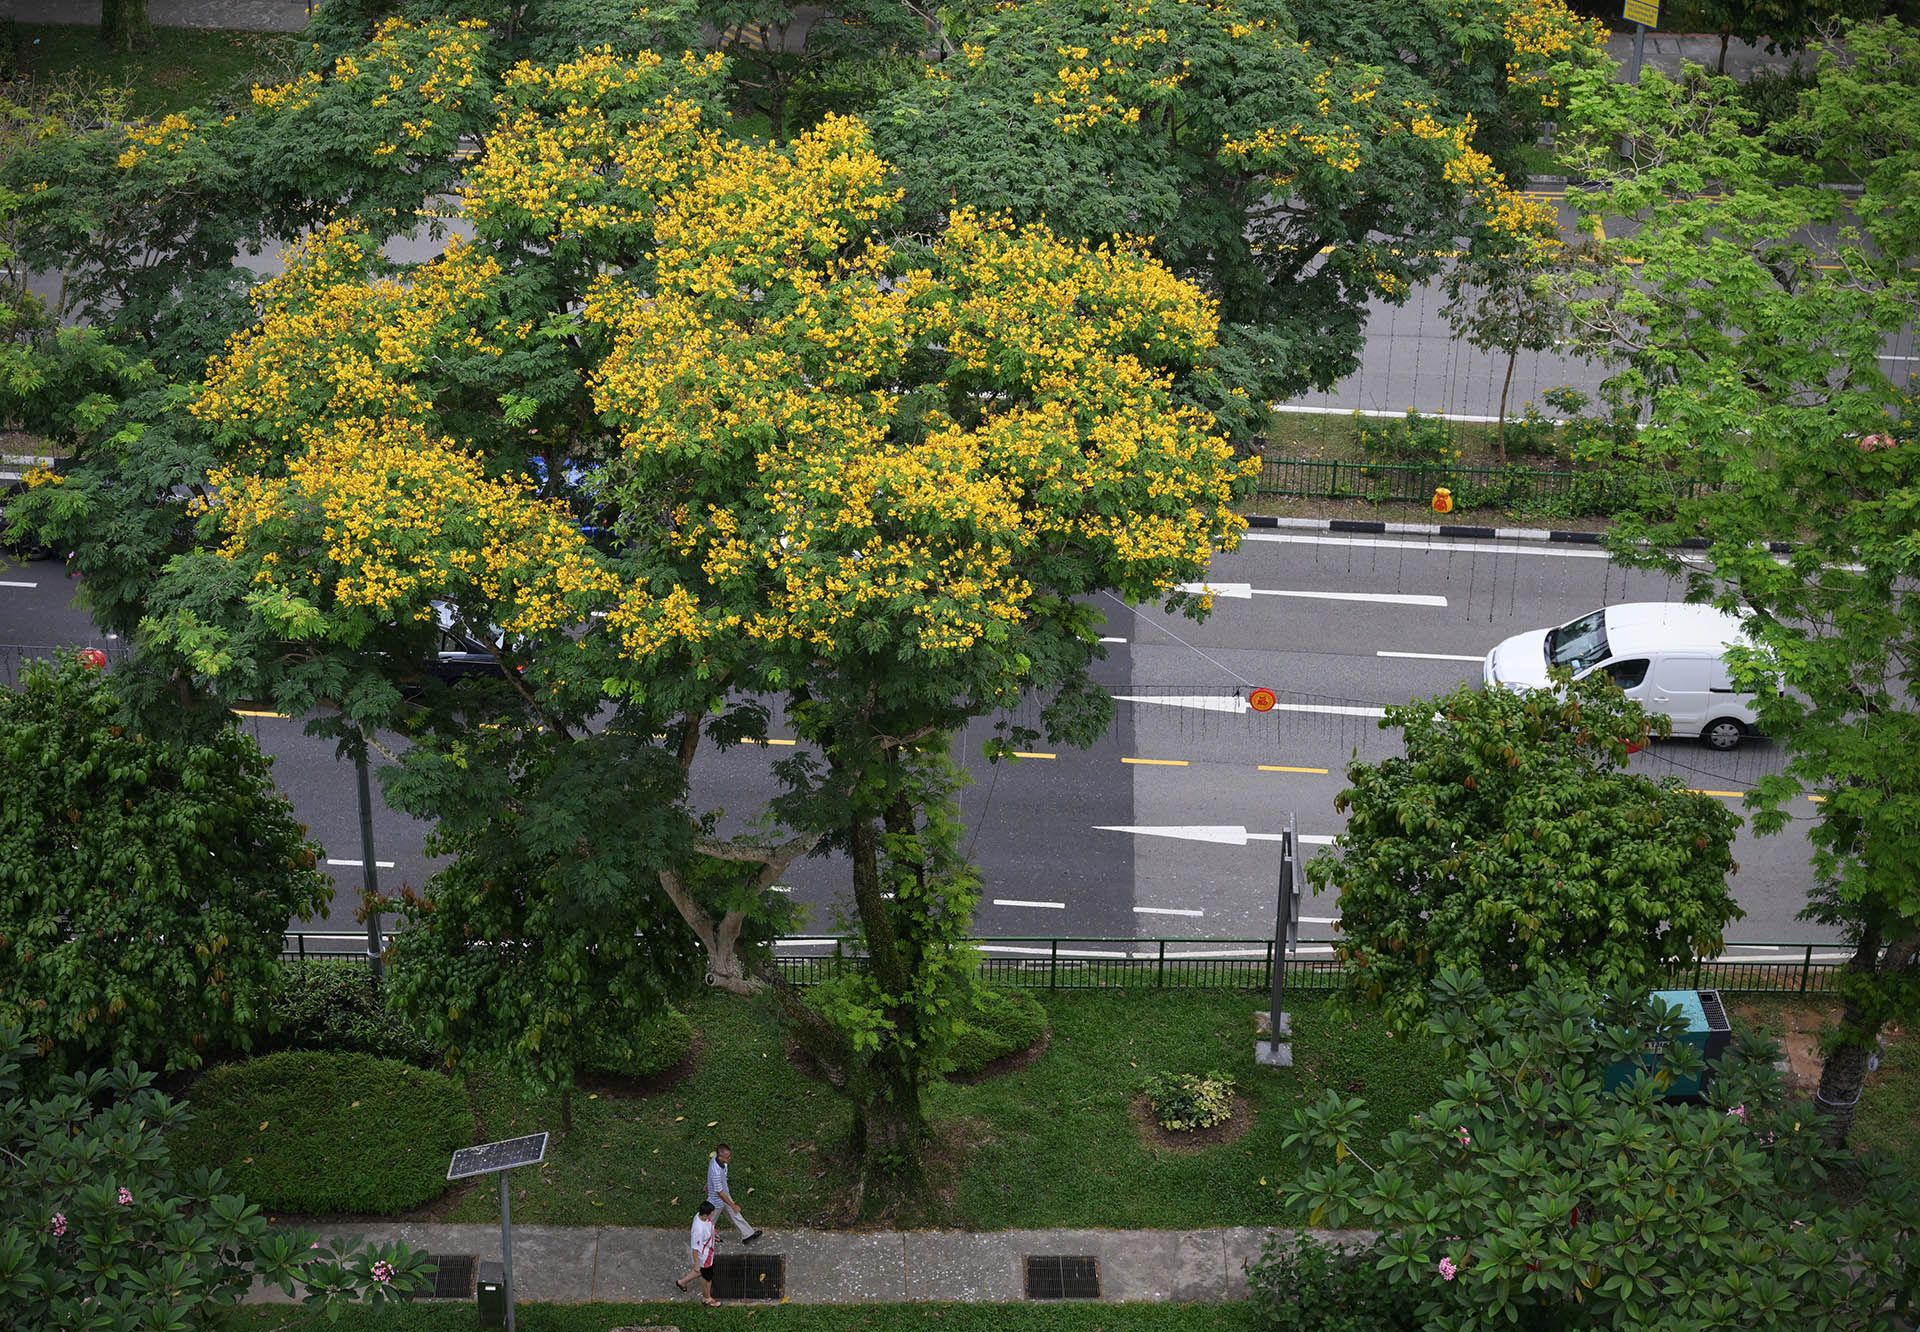 Brilliant yellow blossoms crown yellow flame trees along Bukit Panjang Road blooms on March 1. This drought-resistant tree is well adapted to Singapore’s sunny urban conditions and is a popular choice for roadside planting. ST PHOTO: NG SOR LUAN